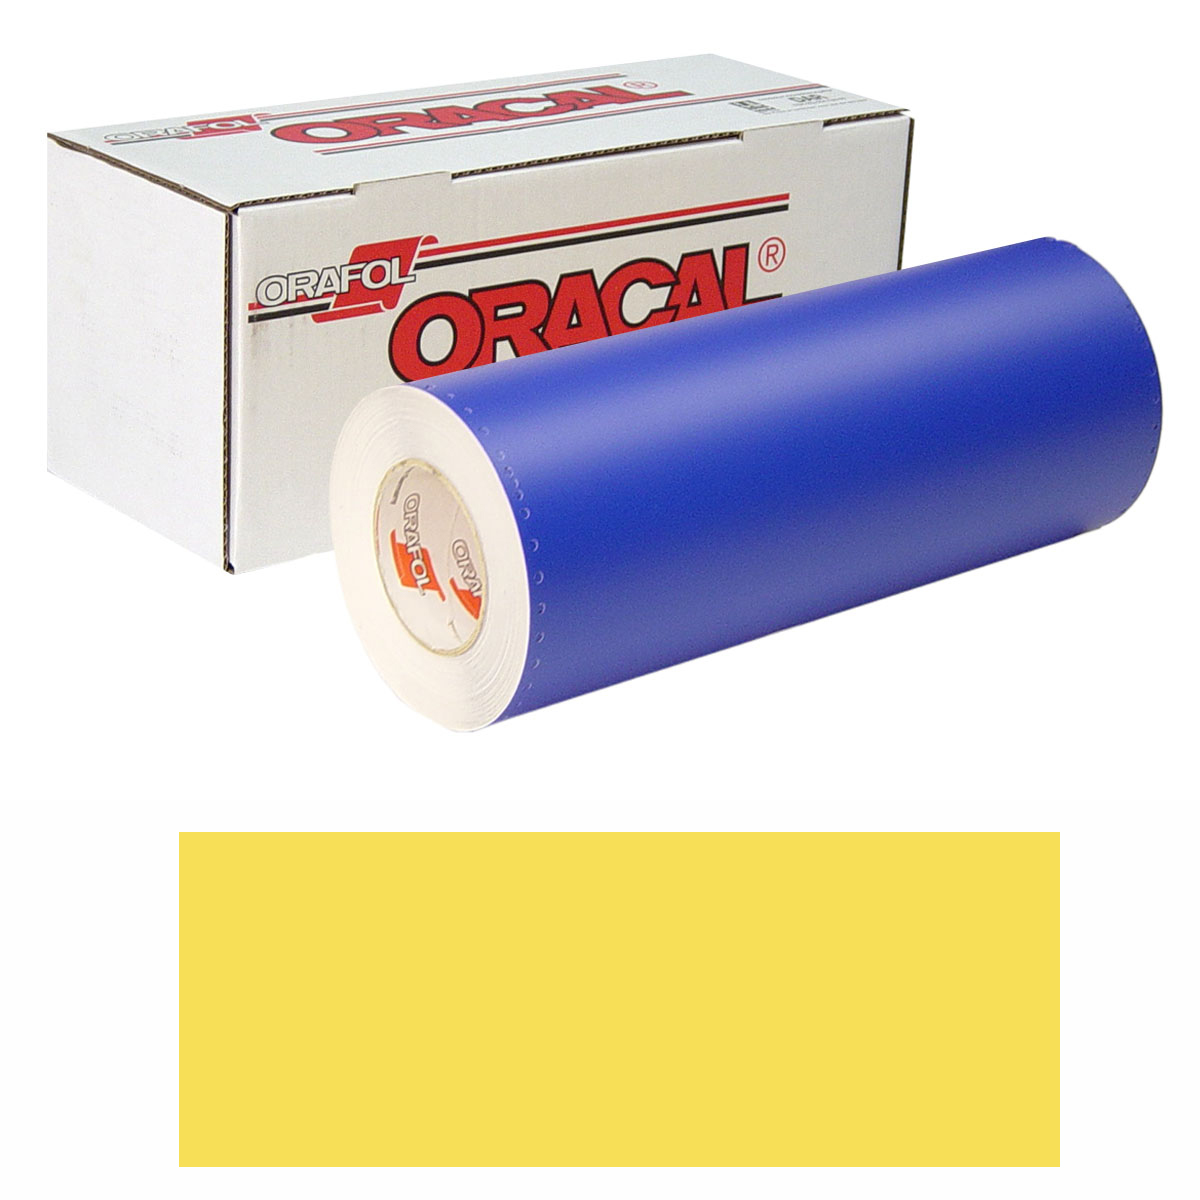 ORACAL 8300 30in X 10yd 021 Yellow